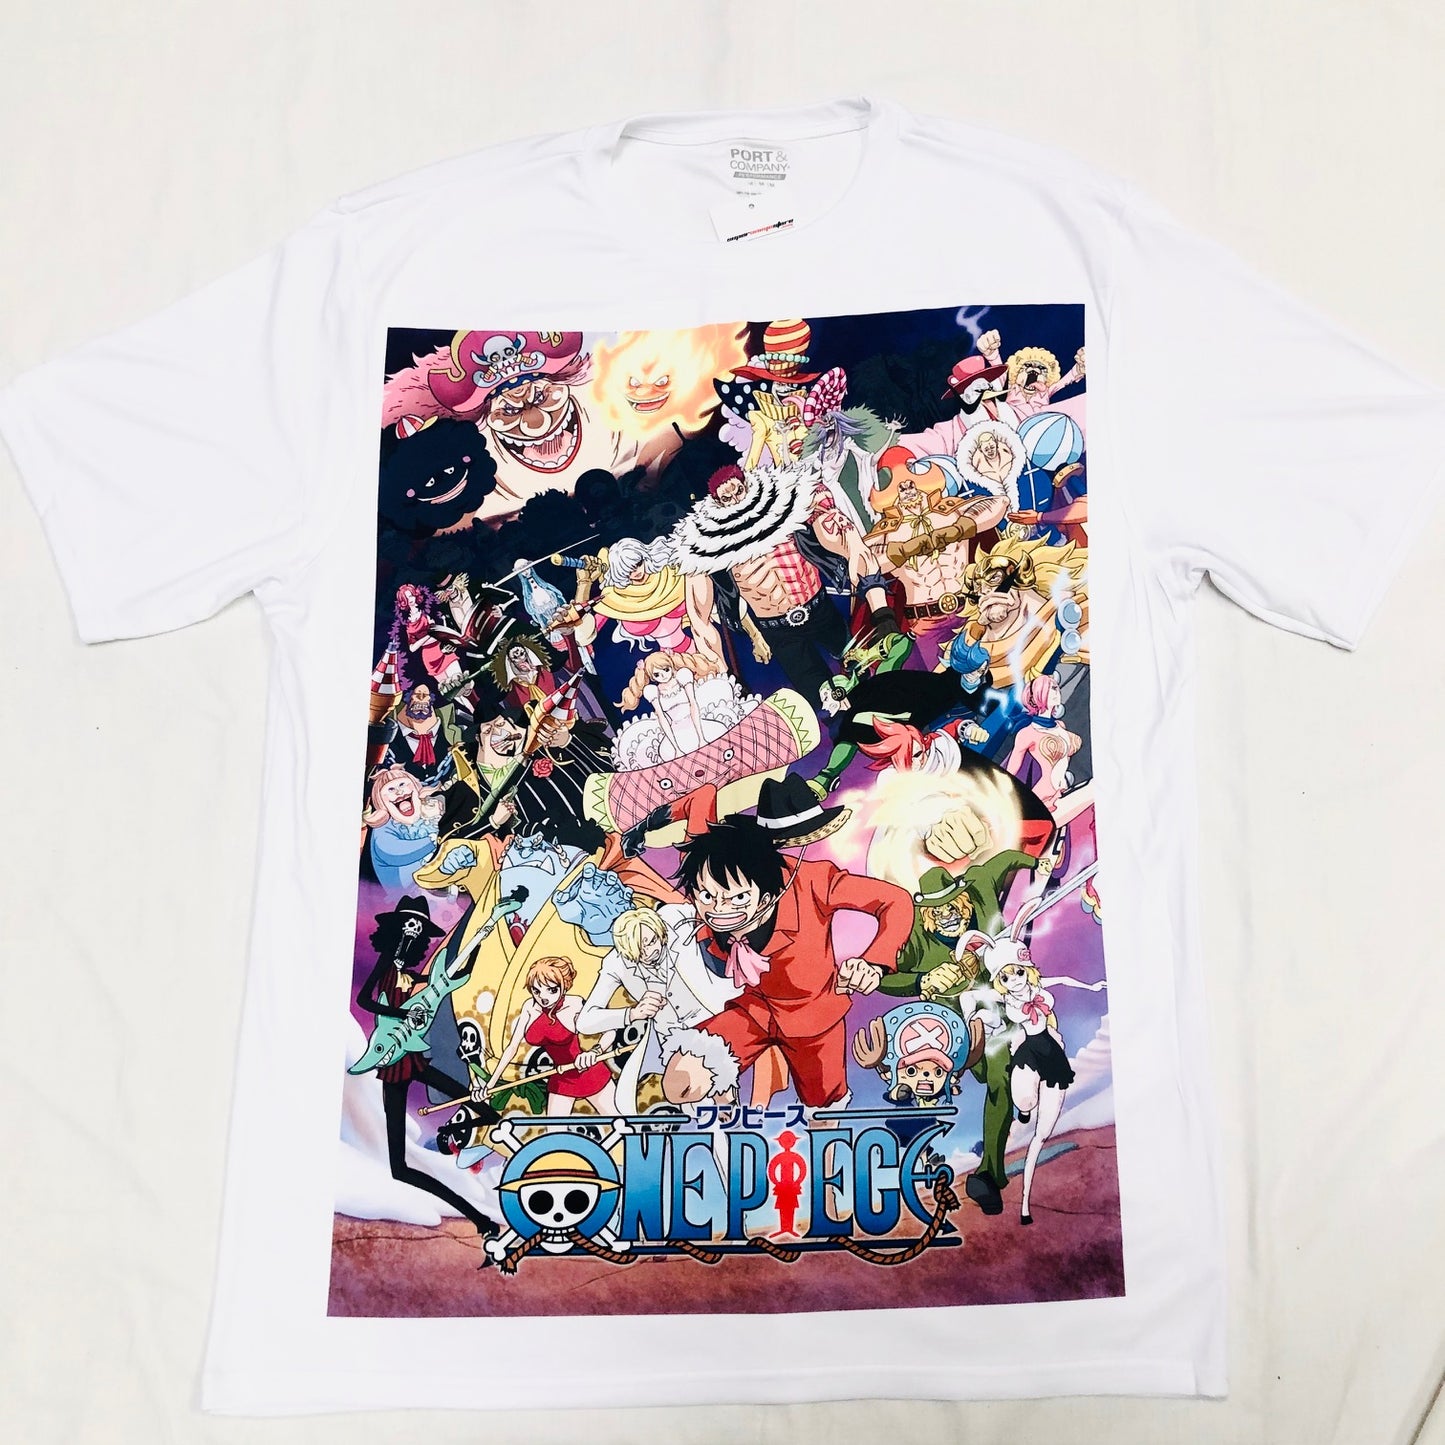 Anime One Piece T-Shirt - Super Anime Store FREE SHIPPING FAST SHIPPING USA